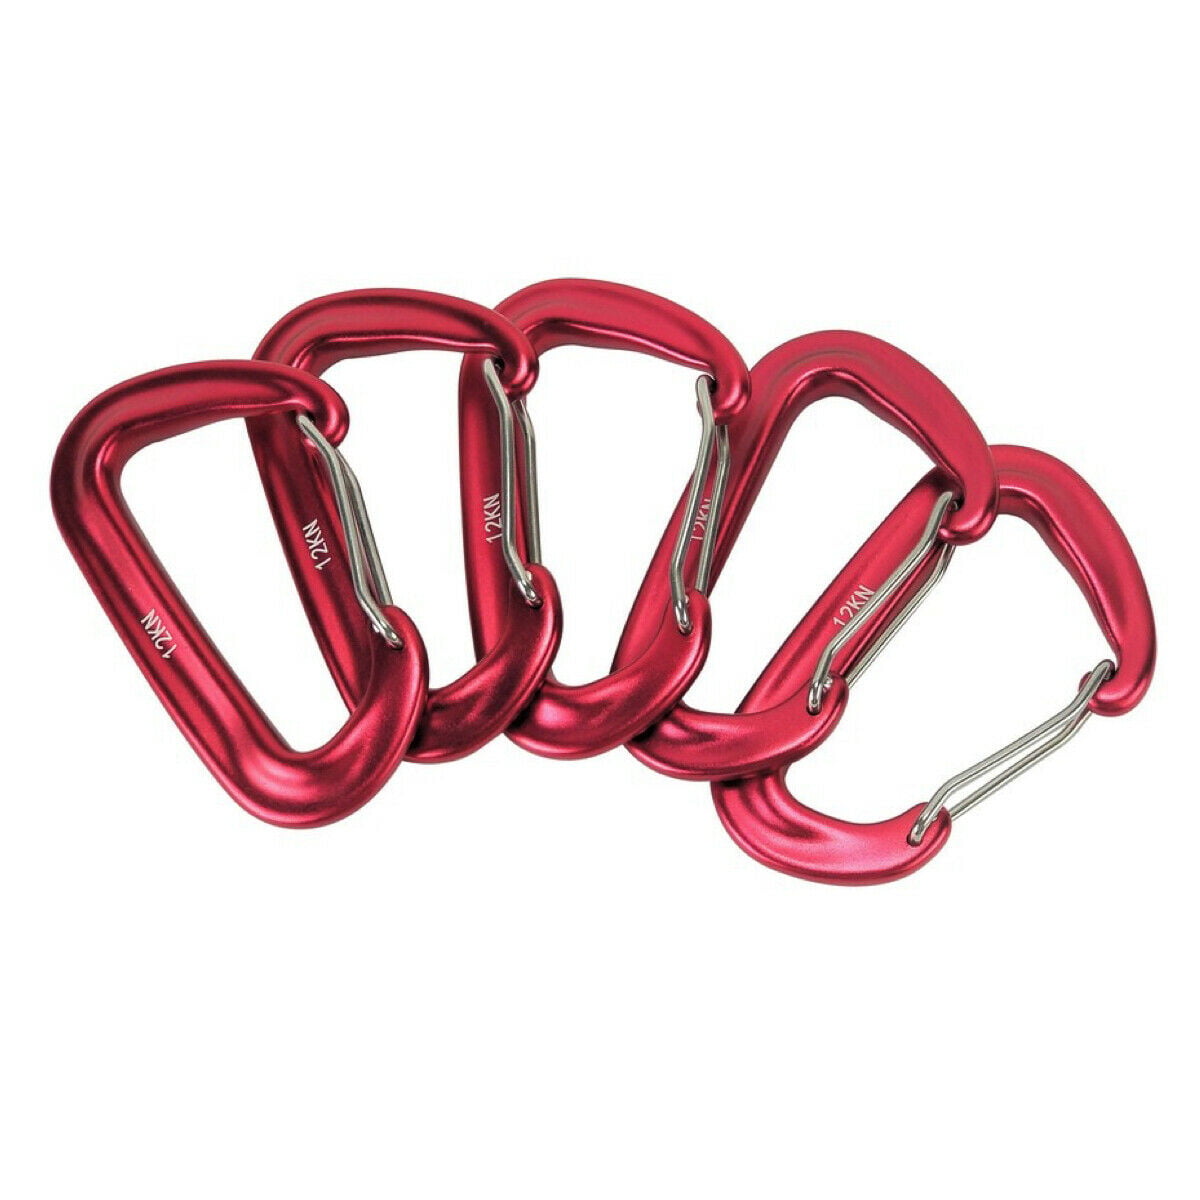 4 Details about  /  Aircraft Grade Lightweight Strong Carabiners for All Hammocks Orange /& Black